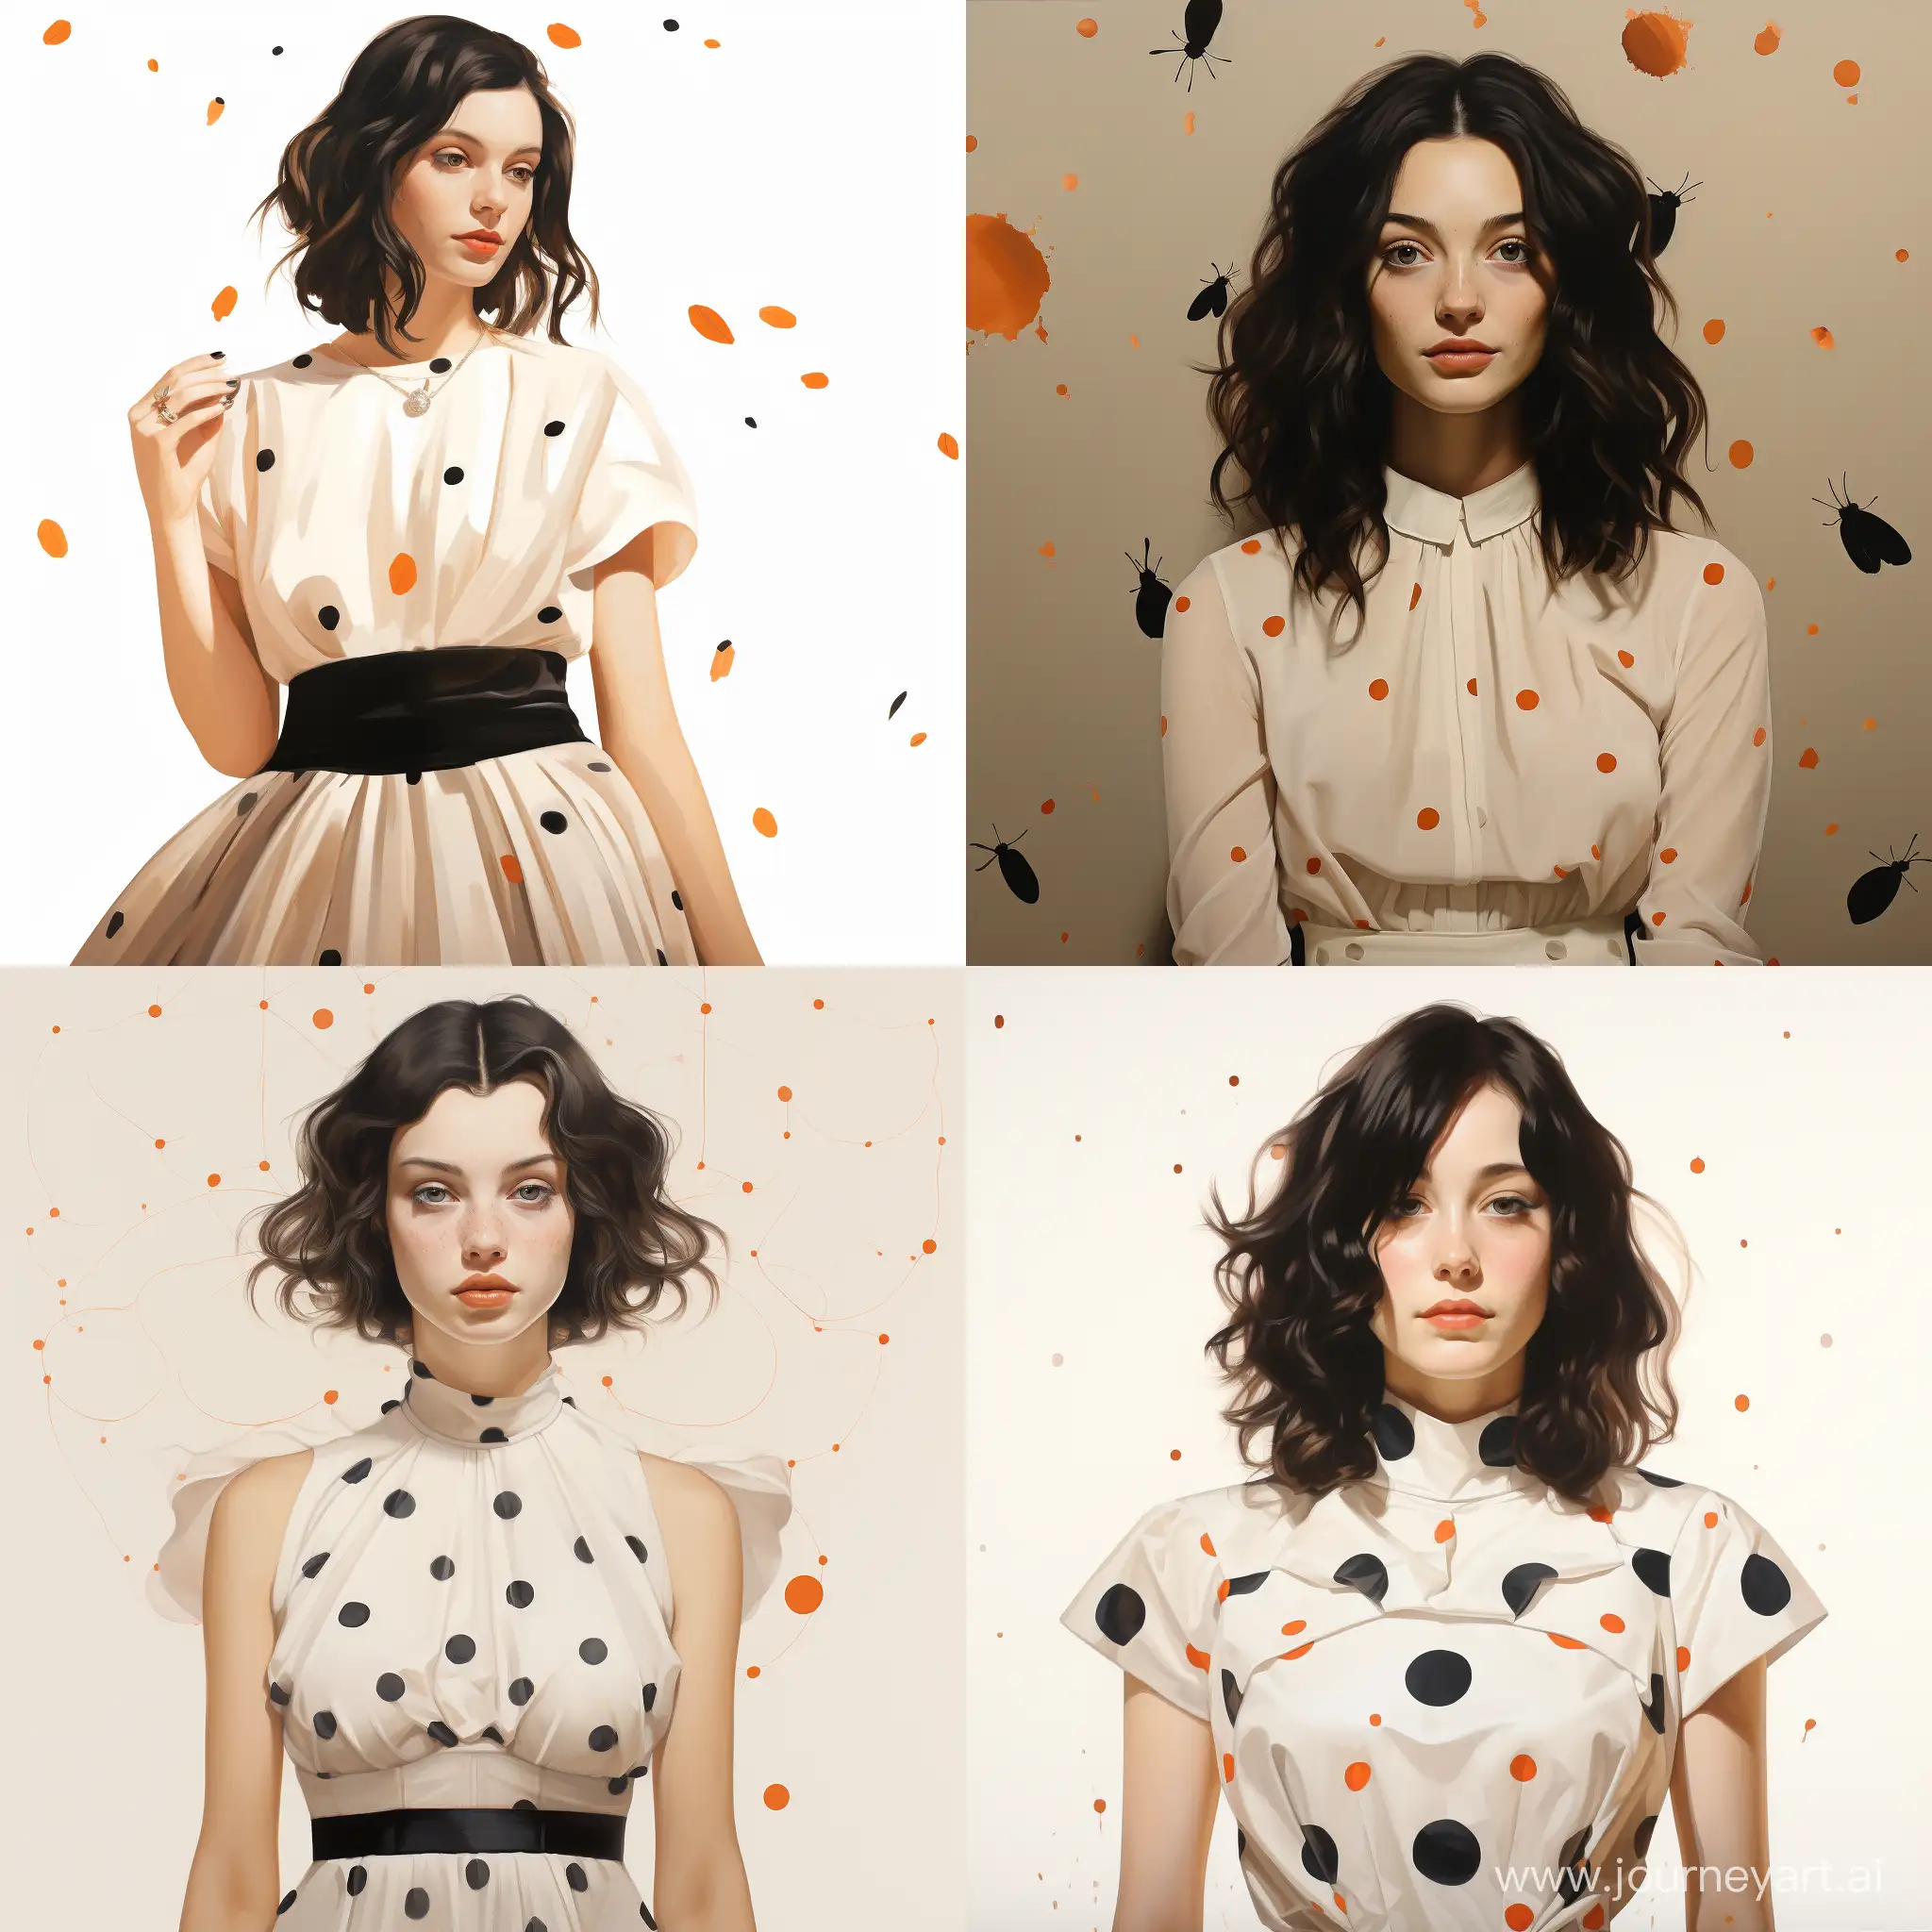 young italian 25yo woman wearing a white and black dress with orange little dots, dress inspired by an insect, fashion design, realistic,